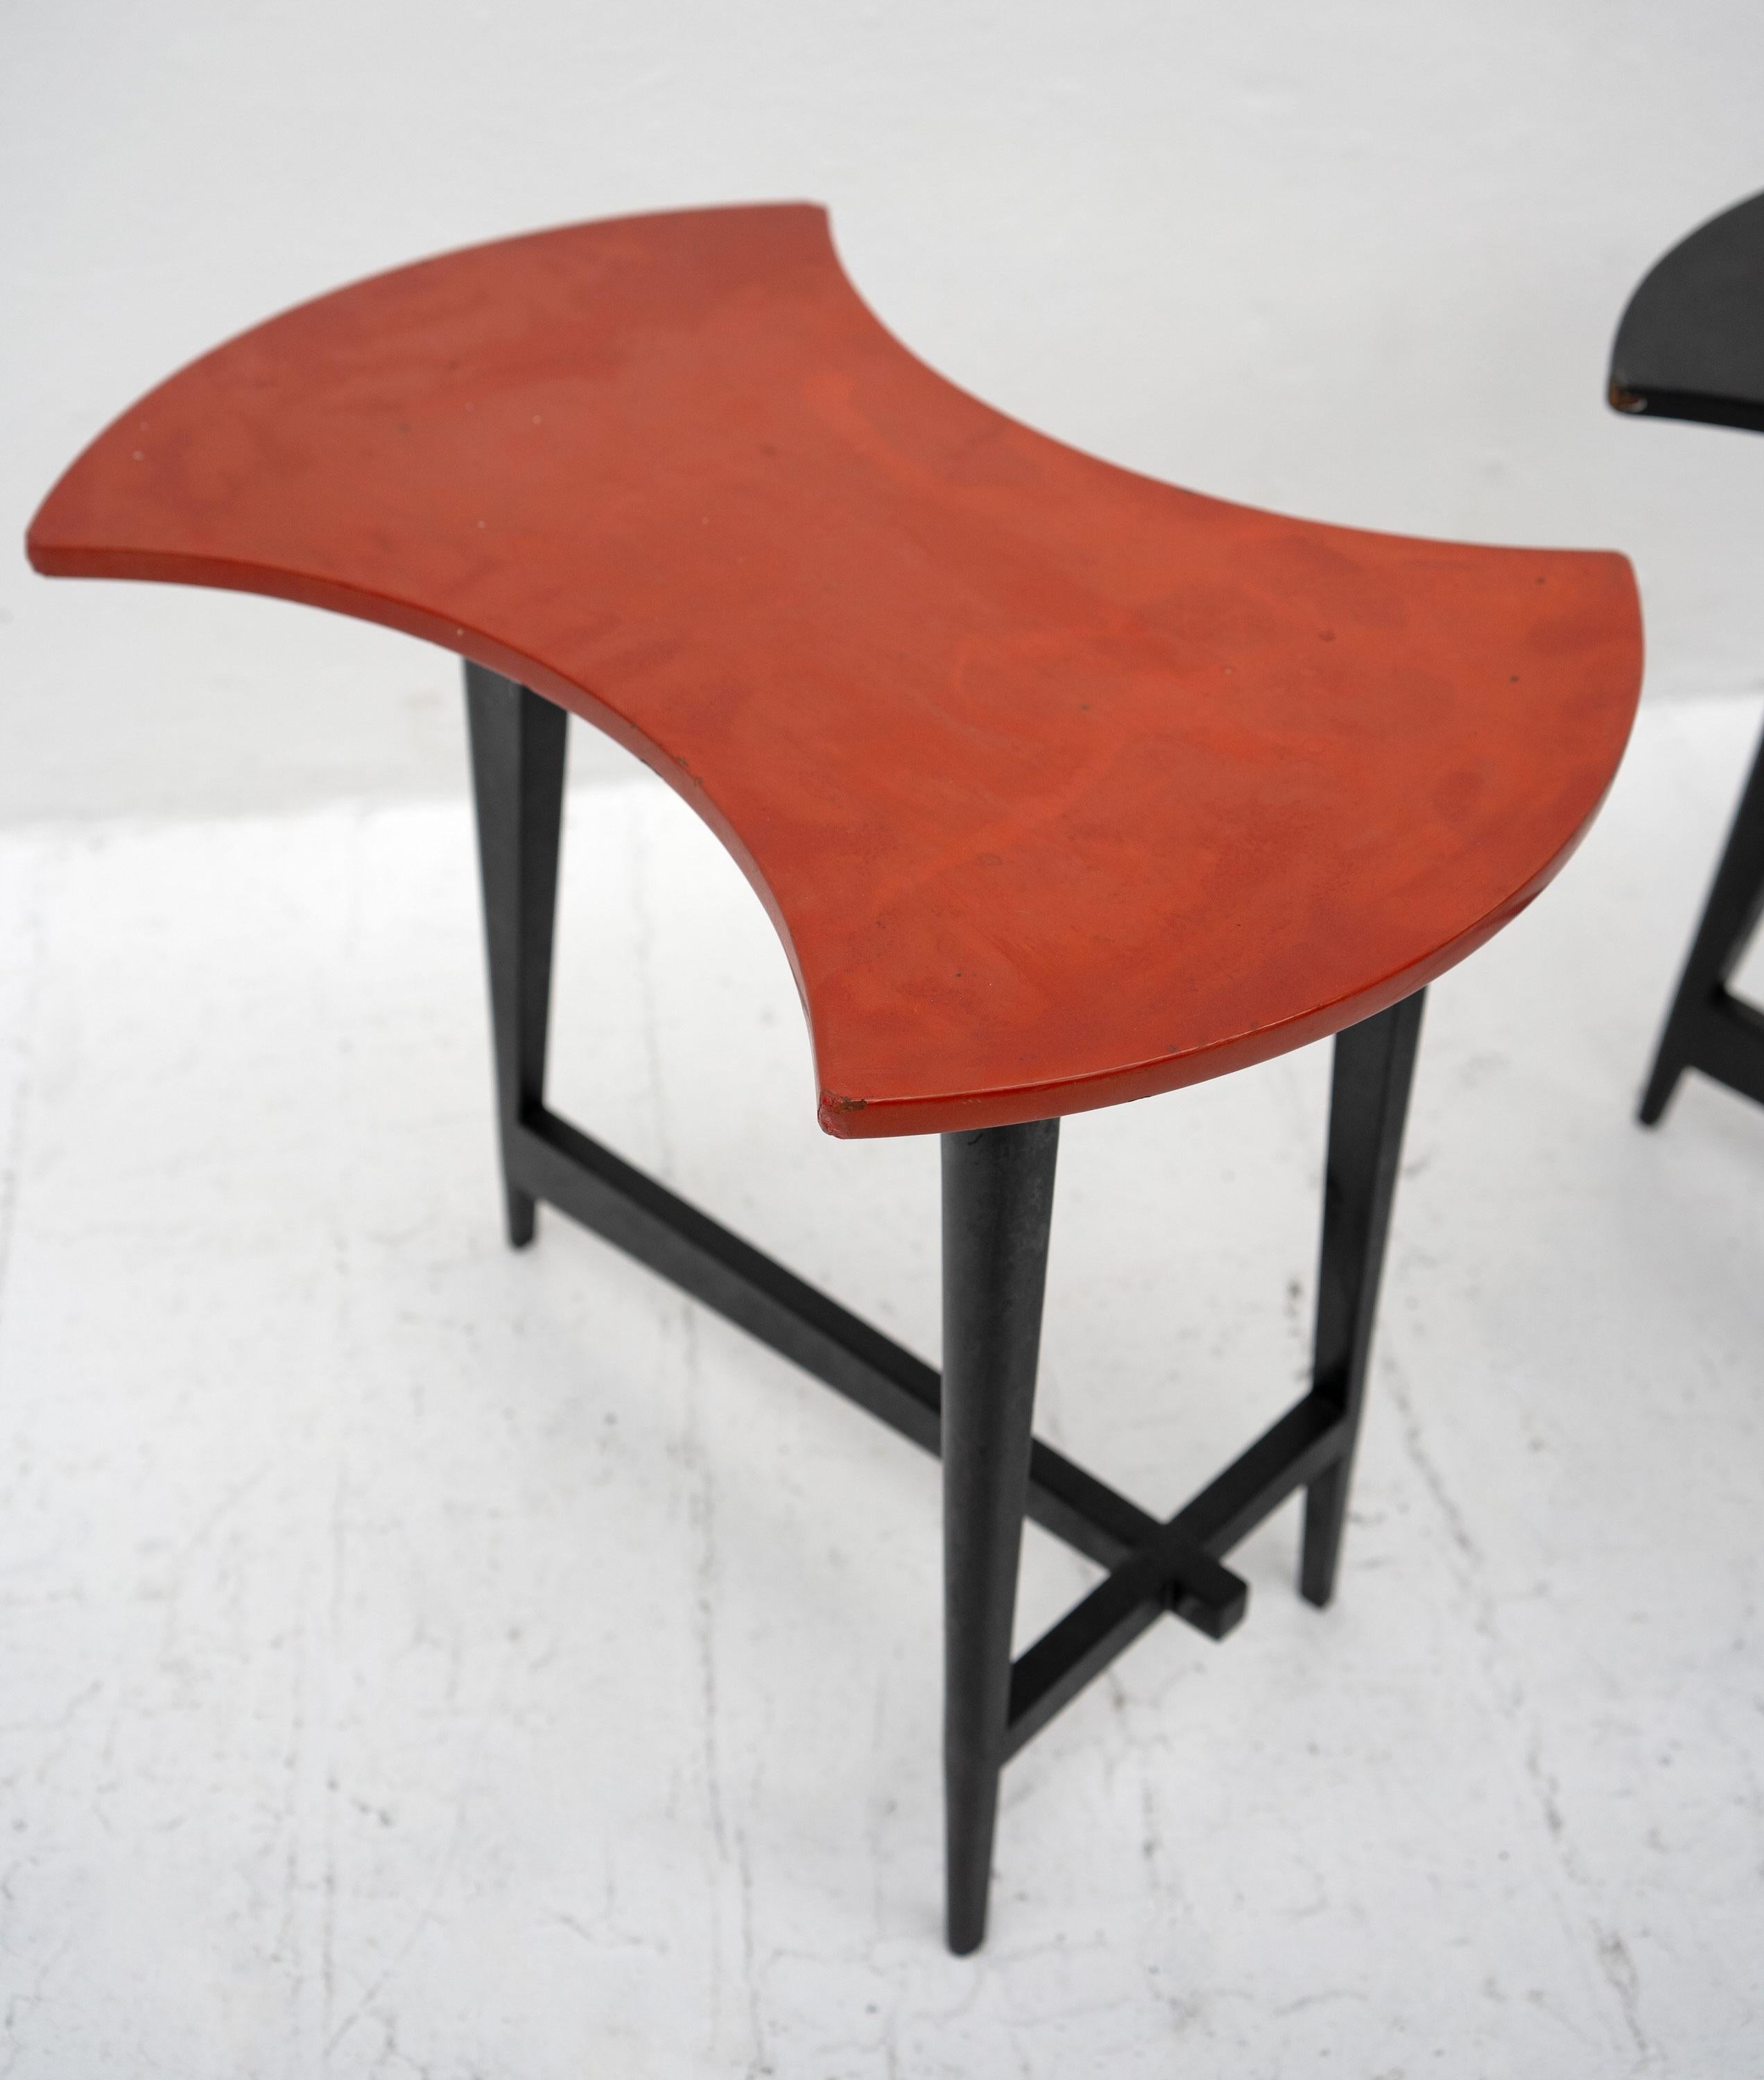 Mid-Century Modern Vintage Lacquered Stools / Side-Tables by Thanh Ley (1919-2003) For Sale